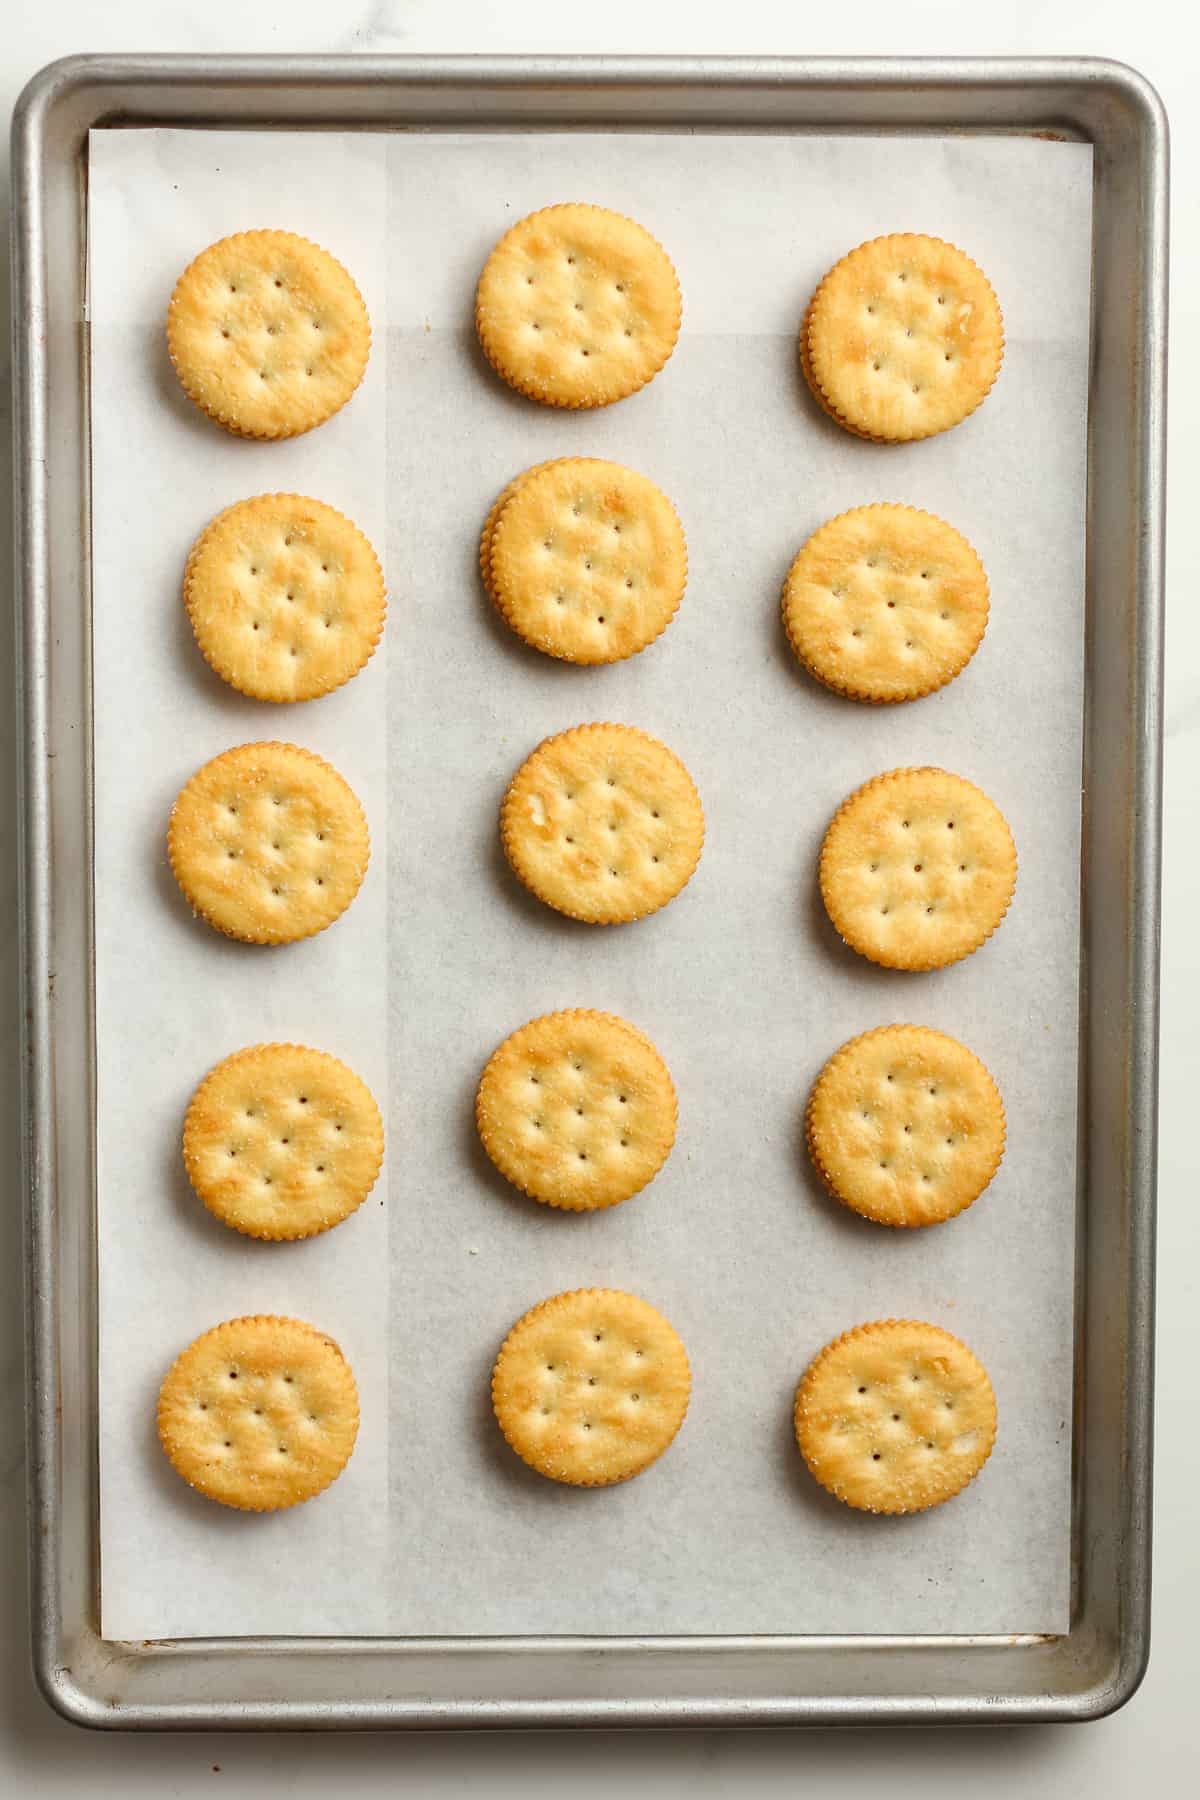 A pan of the ritz crackers with peanut butter.